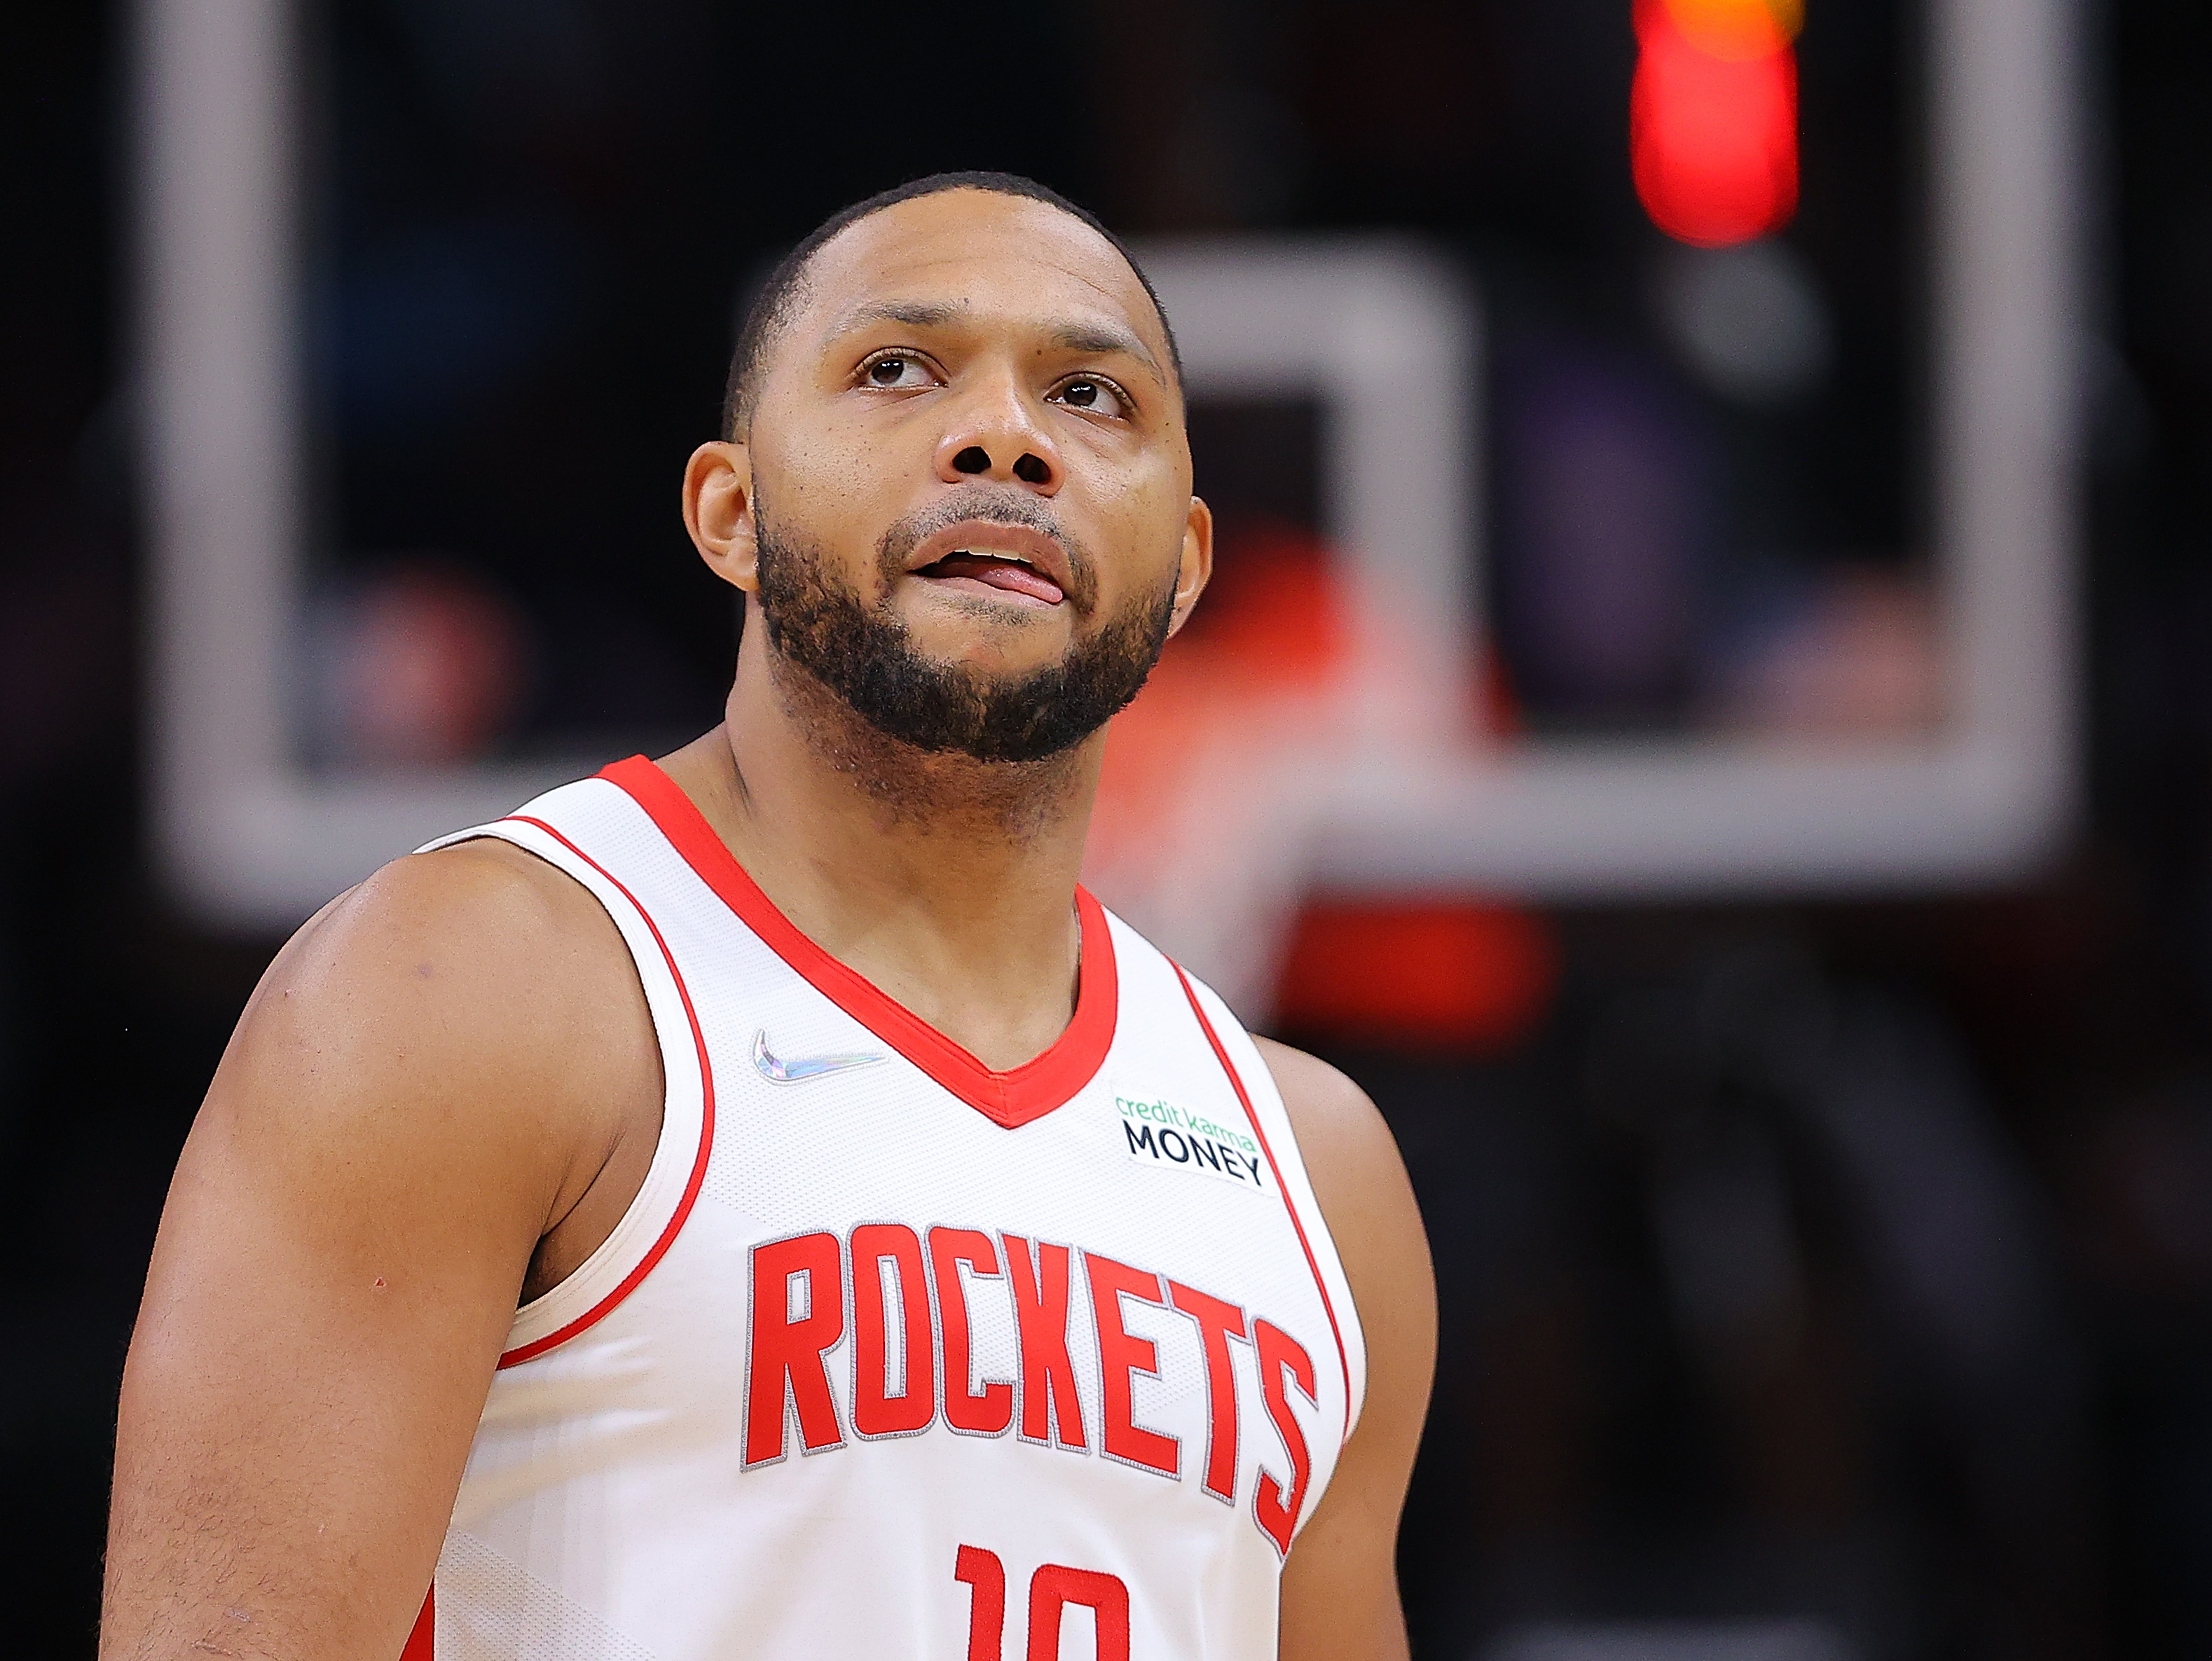 Houston Rockets guard Eric Gordon reacts during a game against the Atlanta Hawks